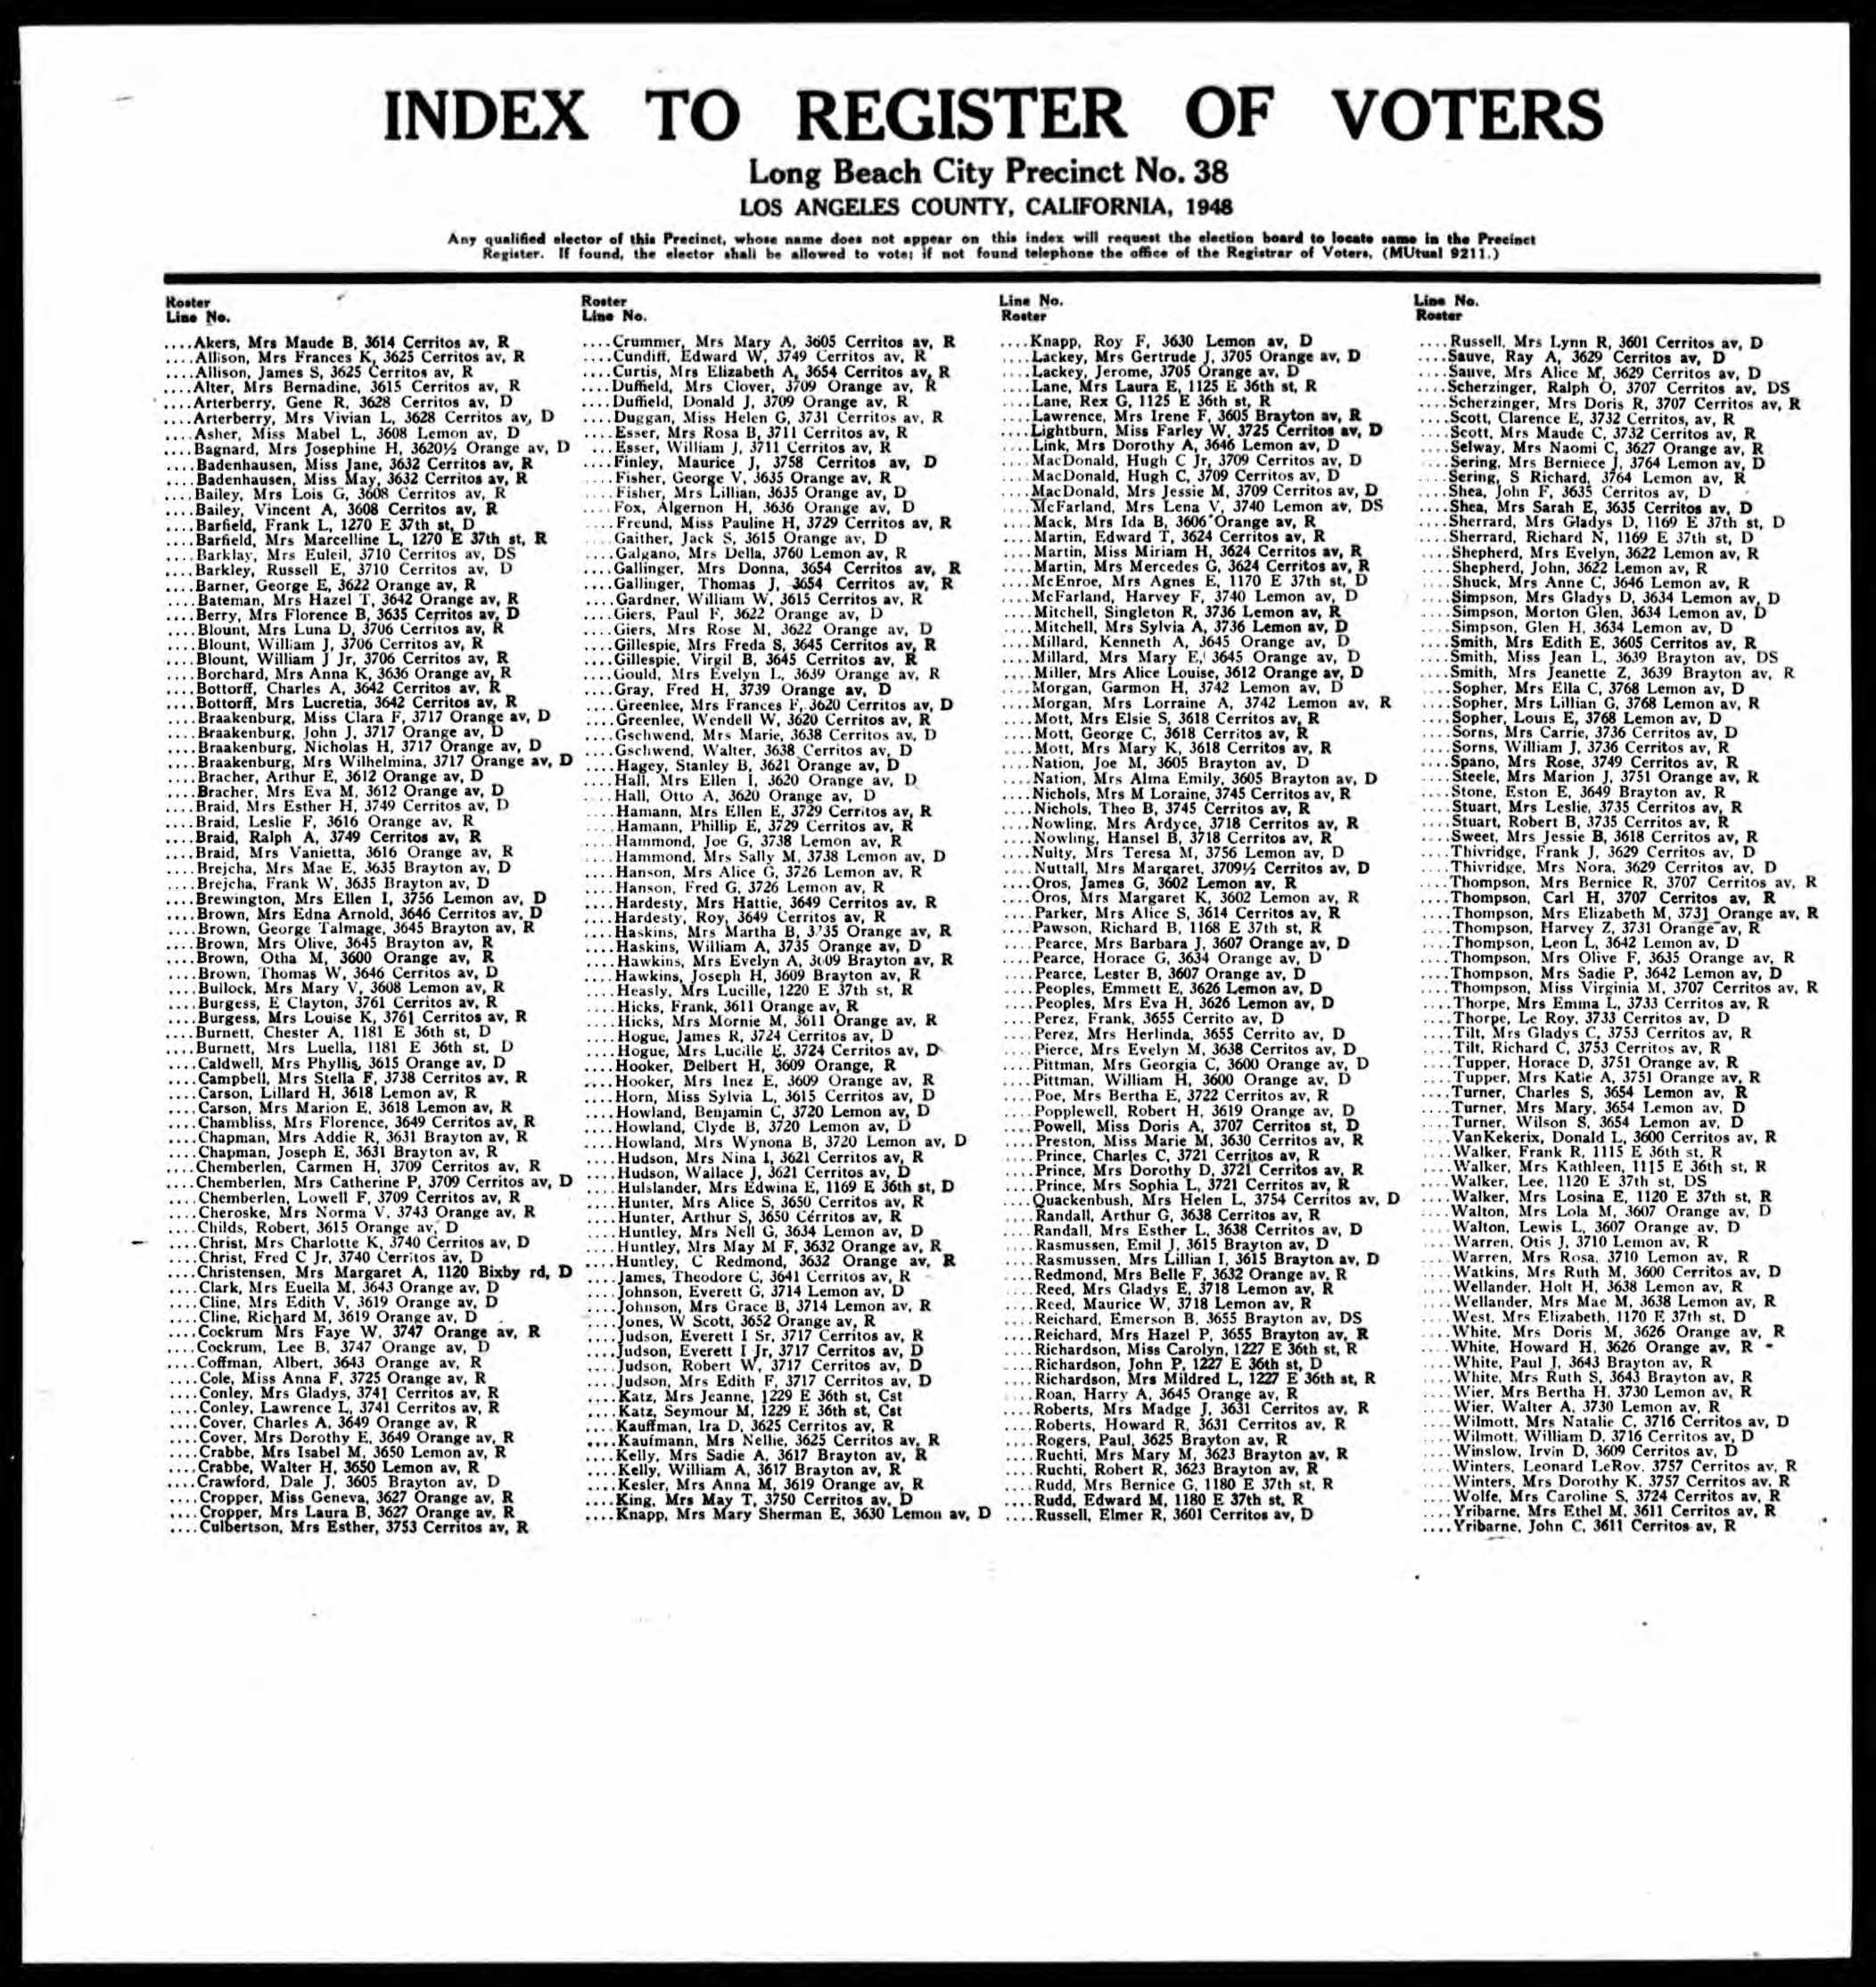 File:Index to Register of Voters, Long Beach City Precinct No. 38, Los Angeles County, California, 1948.jpg